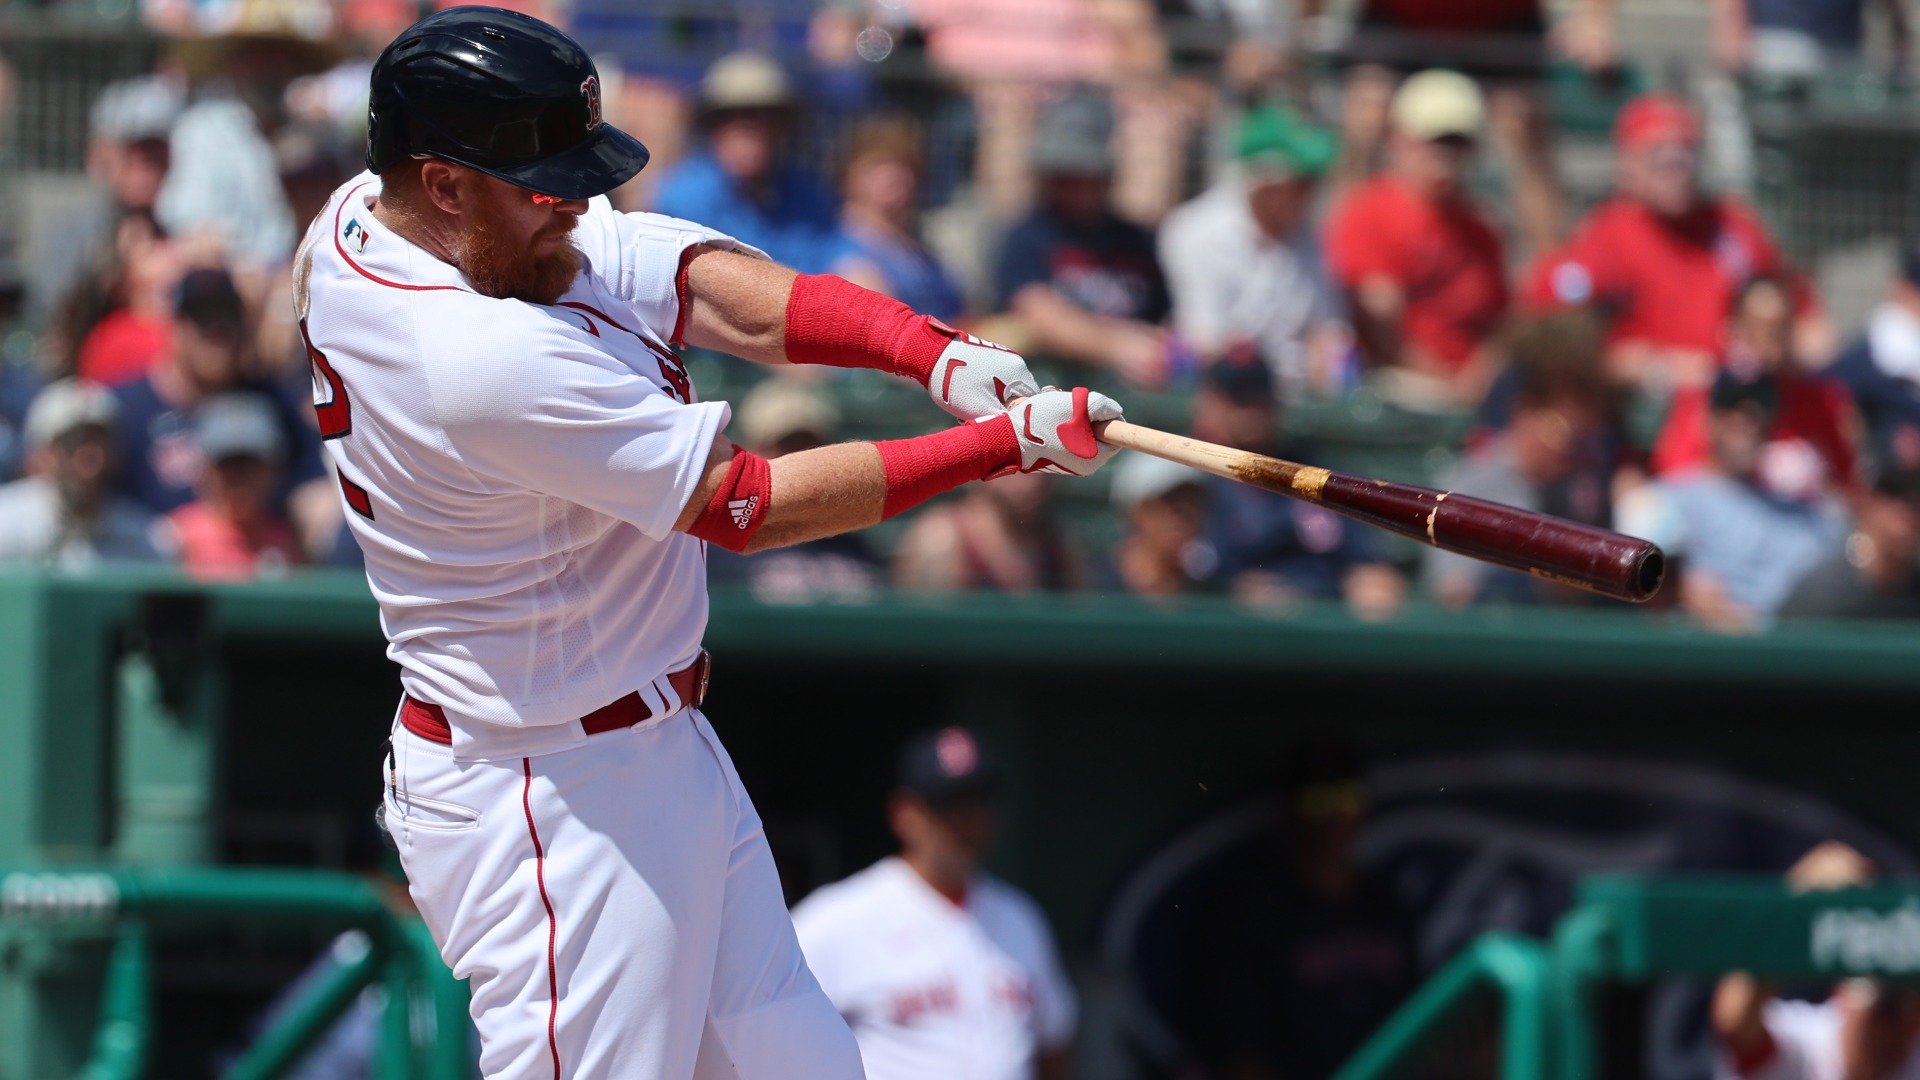 Boston Red Sox infielder Justin Turner gets 16 stitches after